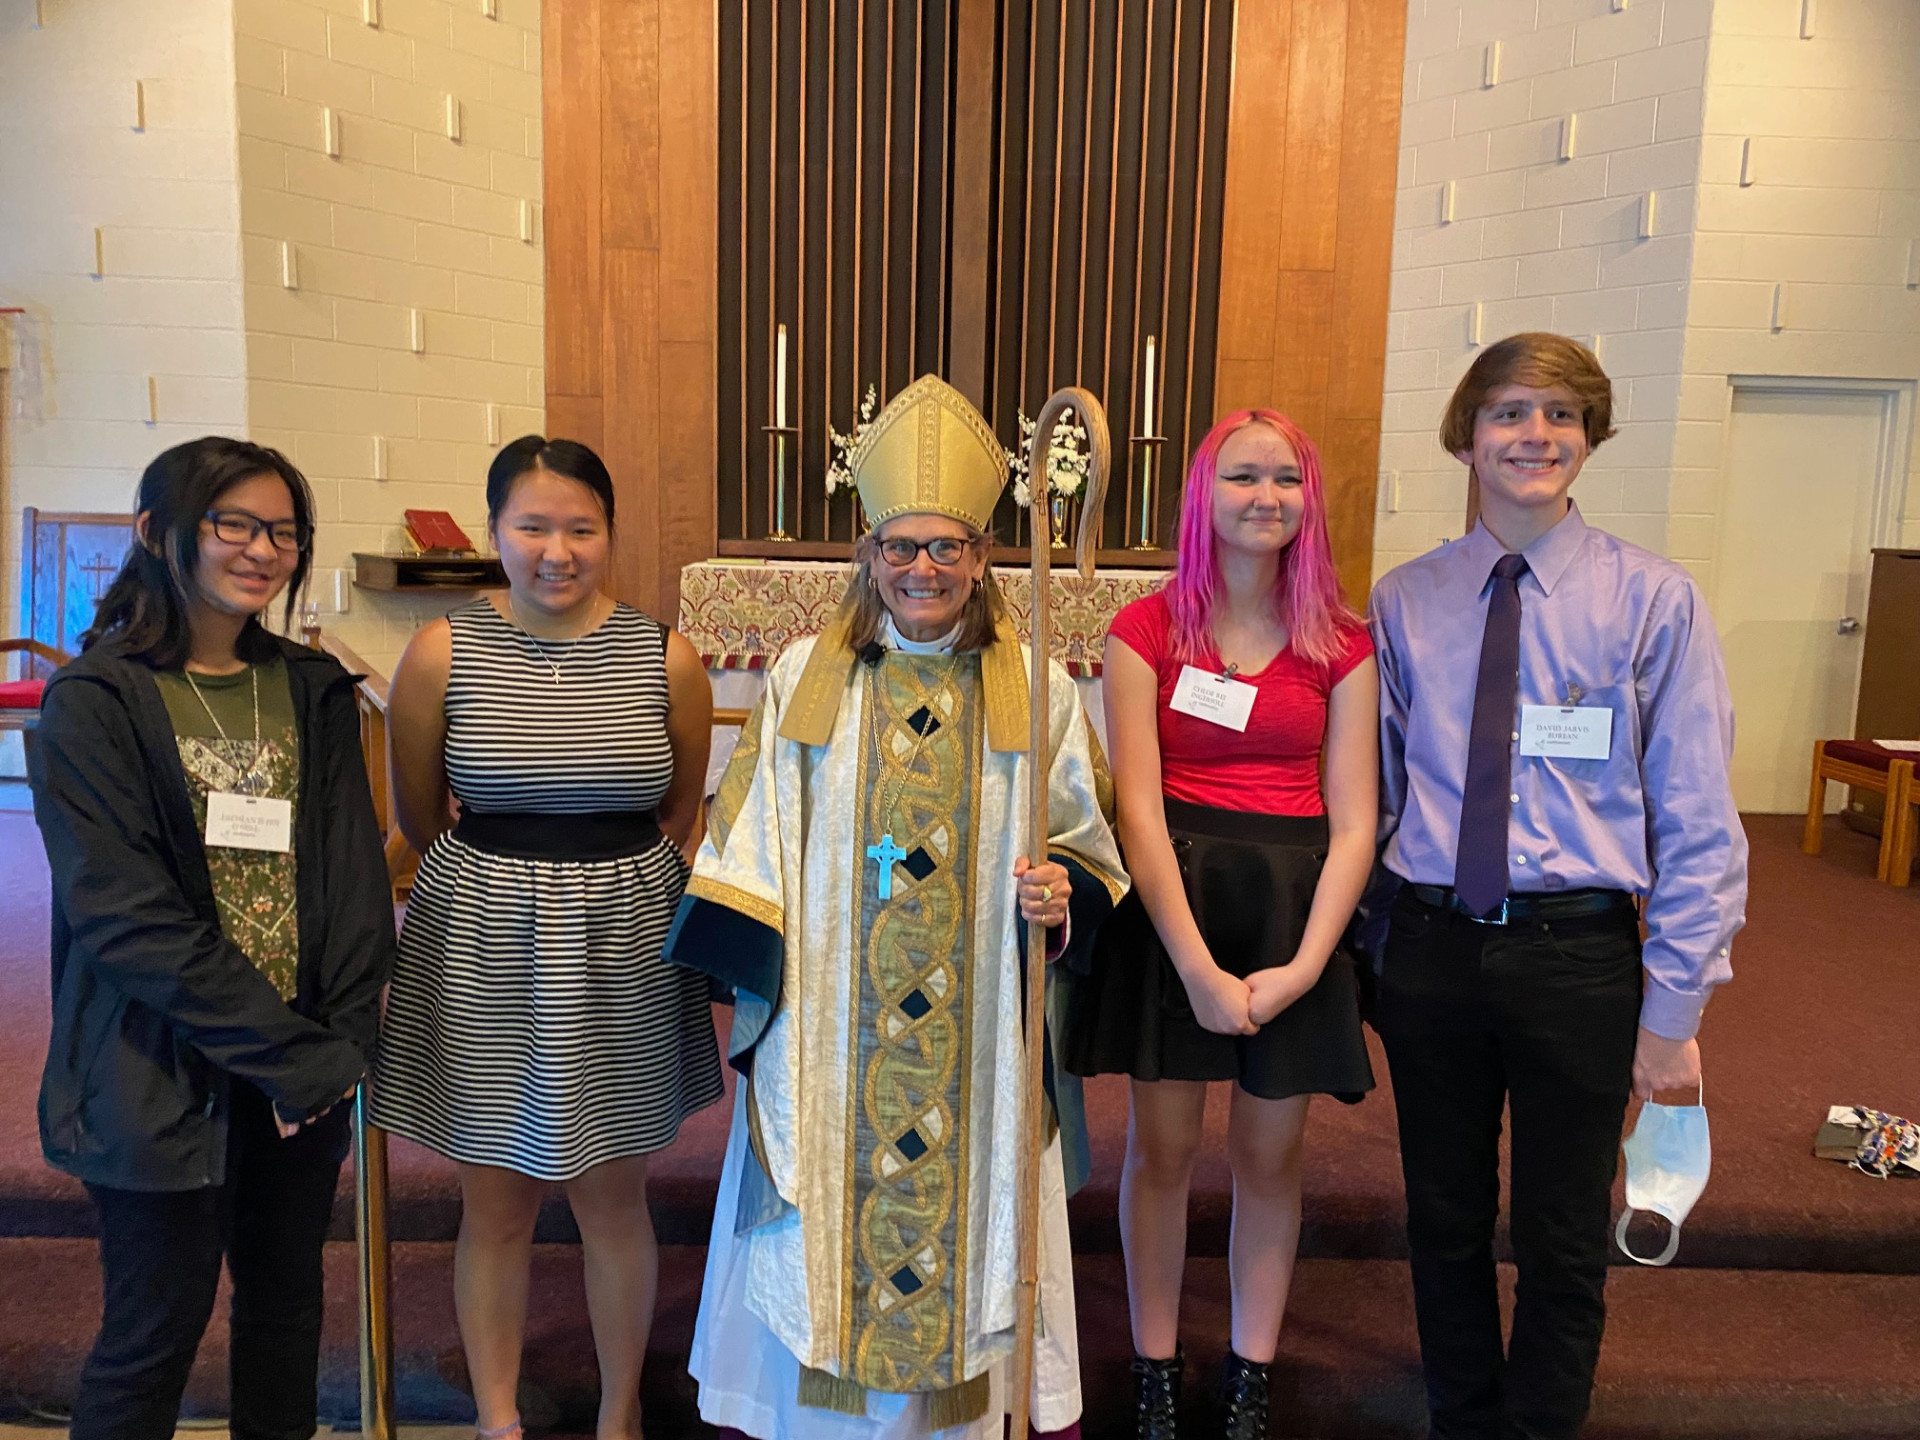 A celebratory scene capturing young individuals and a smiling clergywoman during a confirmation ceremony at St. Stephen's Episcopal Church in Troy. Embracing the significance of spiritual growth within our vibrant community.